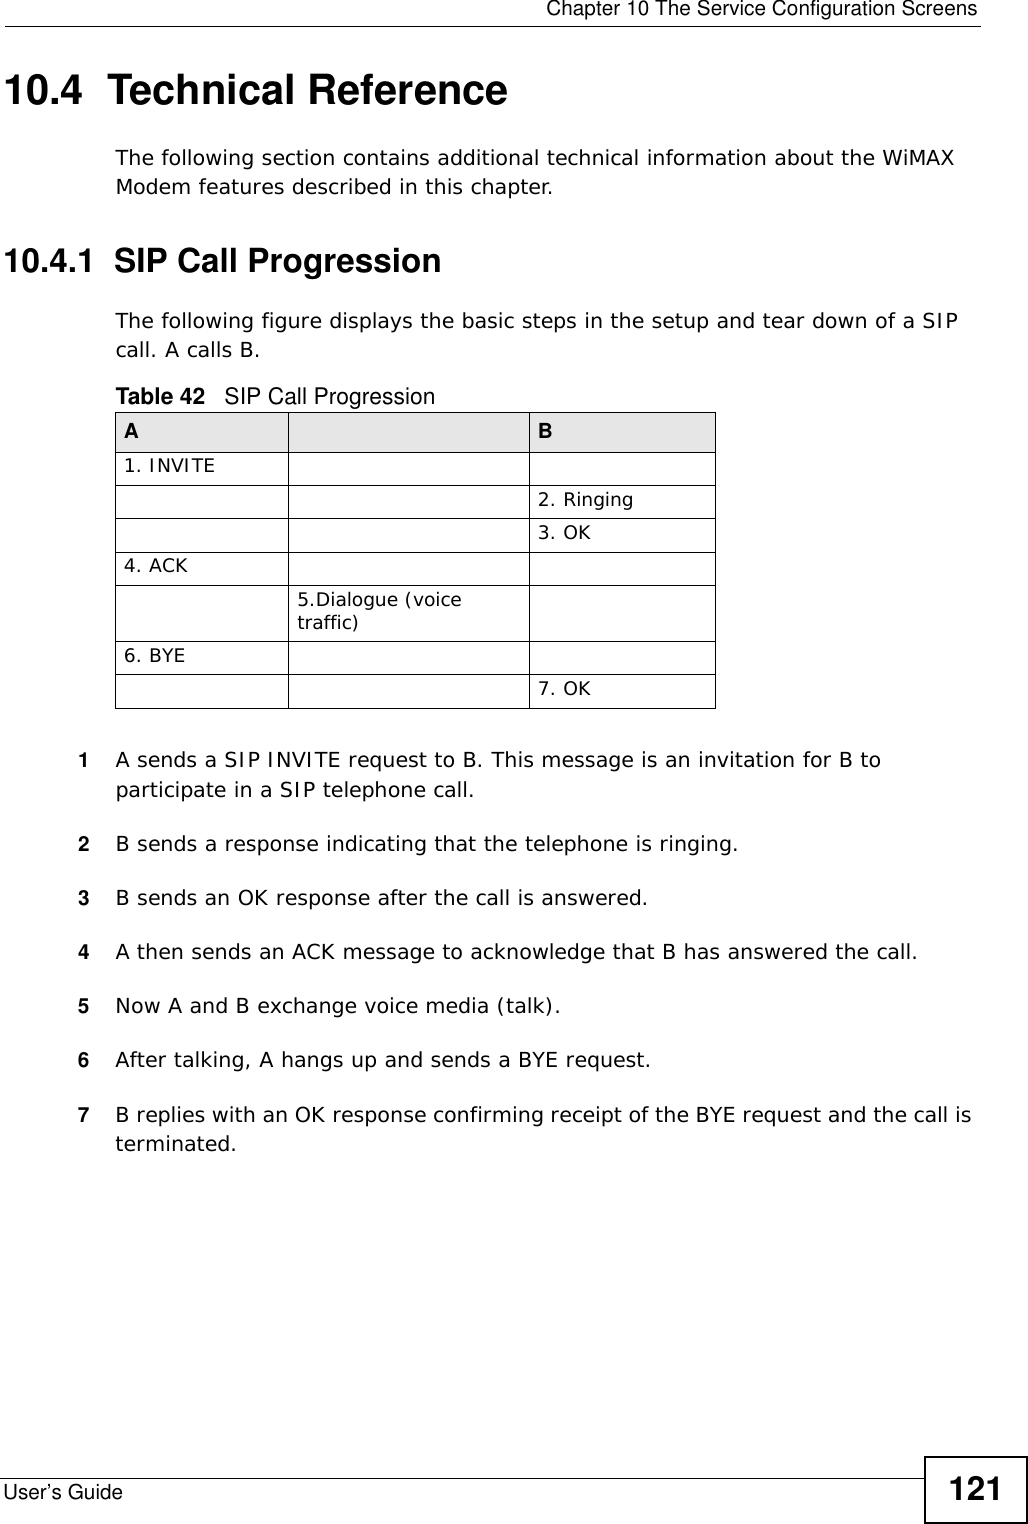  Chapter 10 The Service Configuration ScreensUser’s Guide 12110.4  Technical ReferenceThe following section contains additional technical information about the WiMAX Modem features described in this chapter.10.4.1  SIP Call ProgressionThe following figure displays the basic steps in the setup and tear down of a SIP call. A calls B. 1A sends a SIP INVITE request to B. This message is an invitation for B to participate in a SIP telephone call. 2B sends a response indicating that the telephone is ringing.3B sends an OK response after the call is answered. 4A then sends an ACK message to acknowledge that B has answered the call. 5Now A and B exchange voice media (talk). 6After talking, A hangs up and sends a BYE request. 7B replies with an OK response confirming receipt of the BYE request and the call is terminated.Table 42   SIP Call ProgressionA B1. INVITE2. Ringing3. OK4. ACK 5.Dialogue (voice traffic)6. BYE7. OK